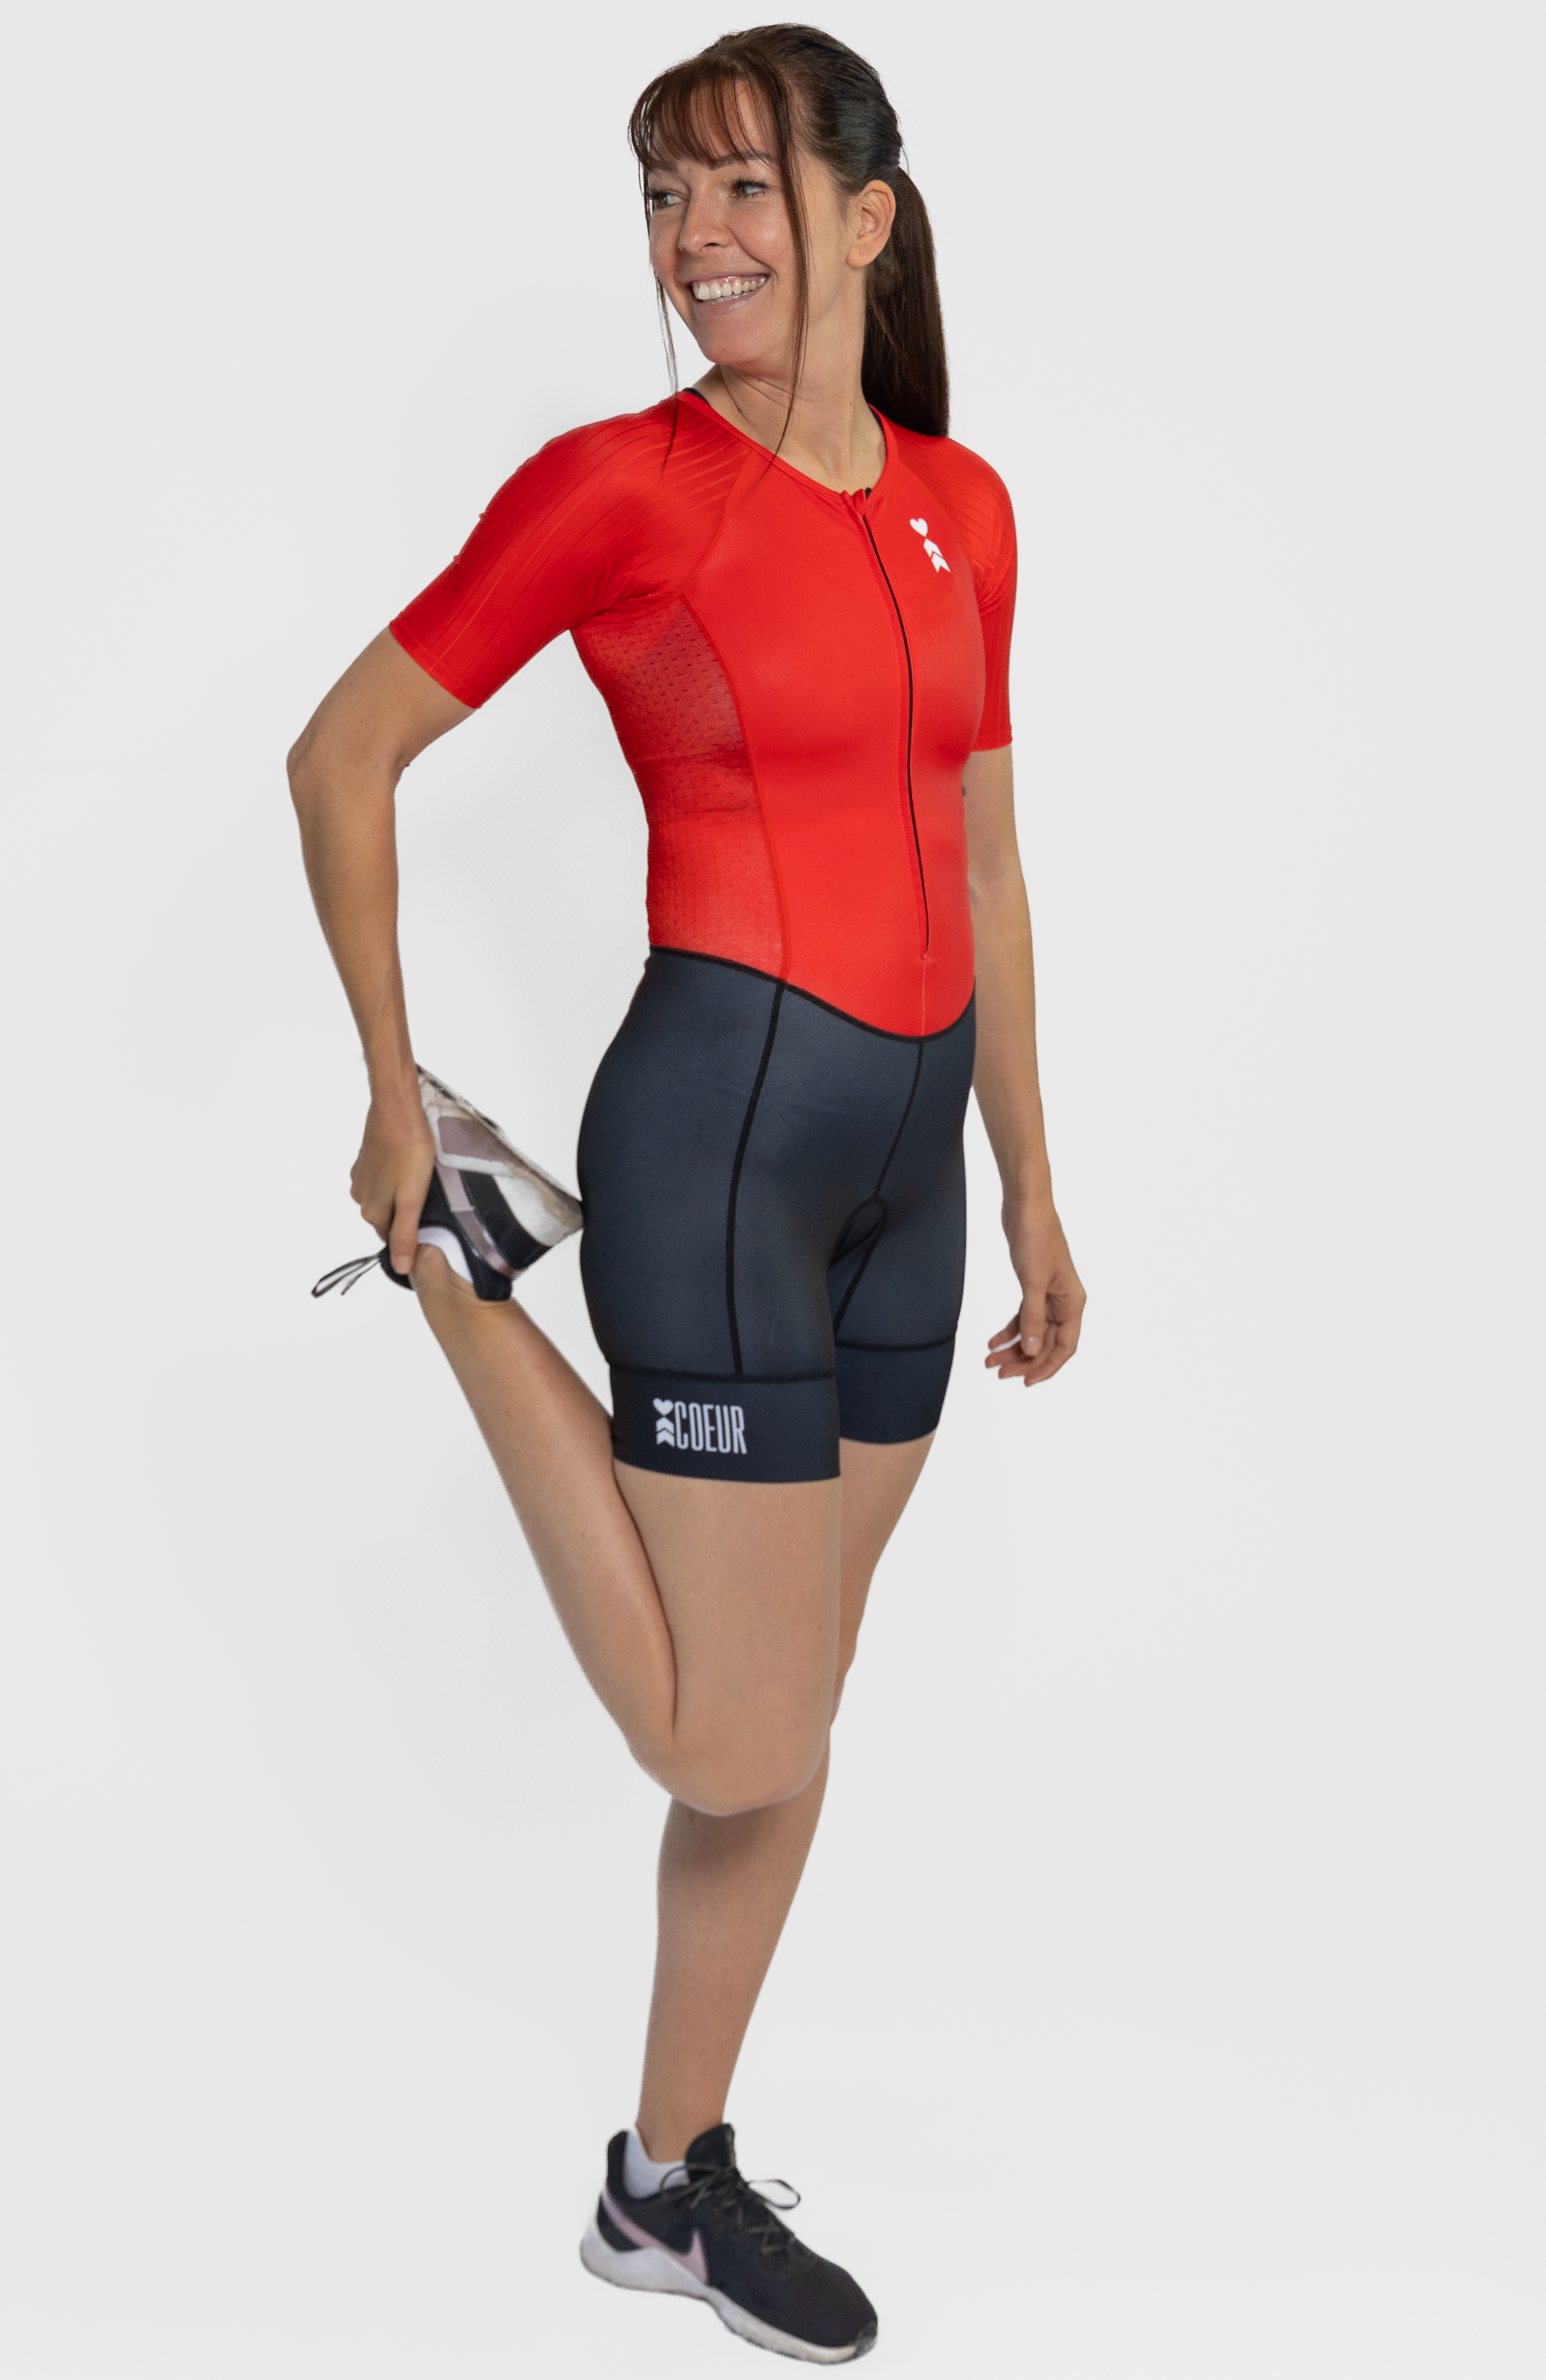 Coeur Sports Sleeved Tri Suit Lava Red Women's Sleeved One Piece Triathlon Suit